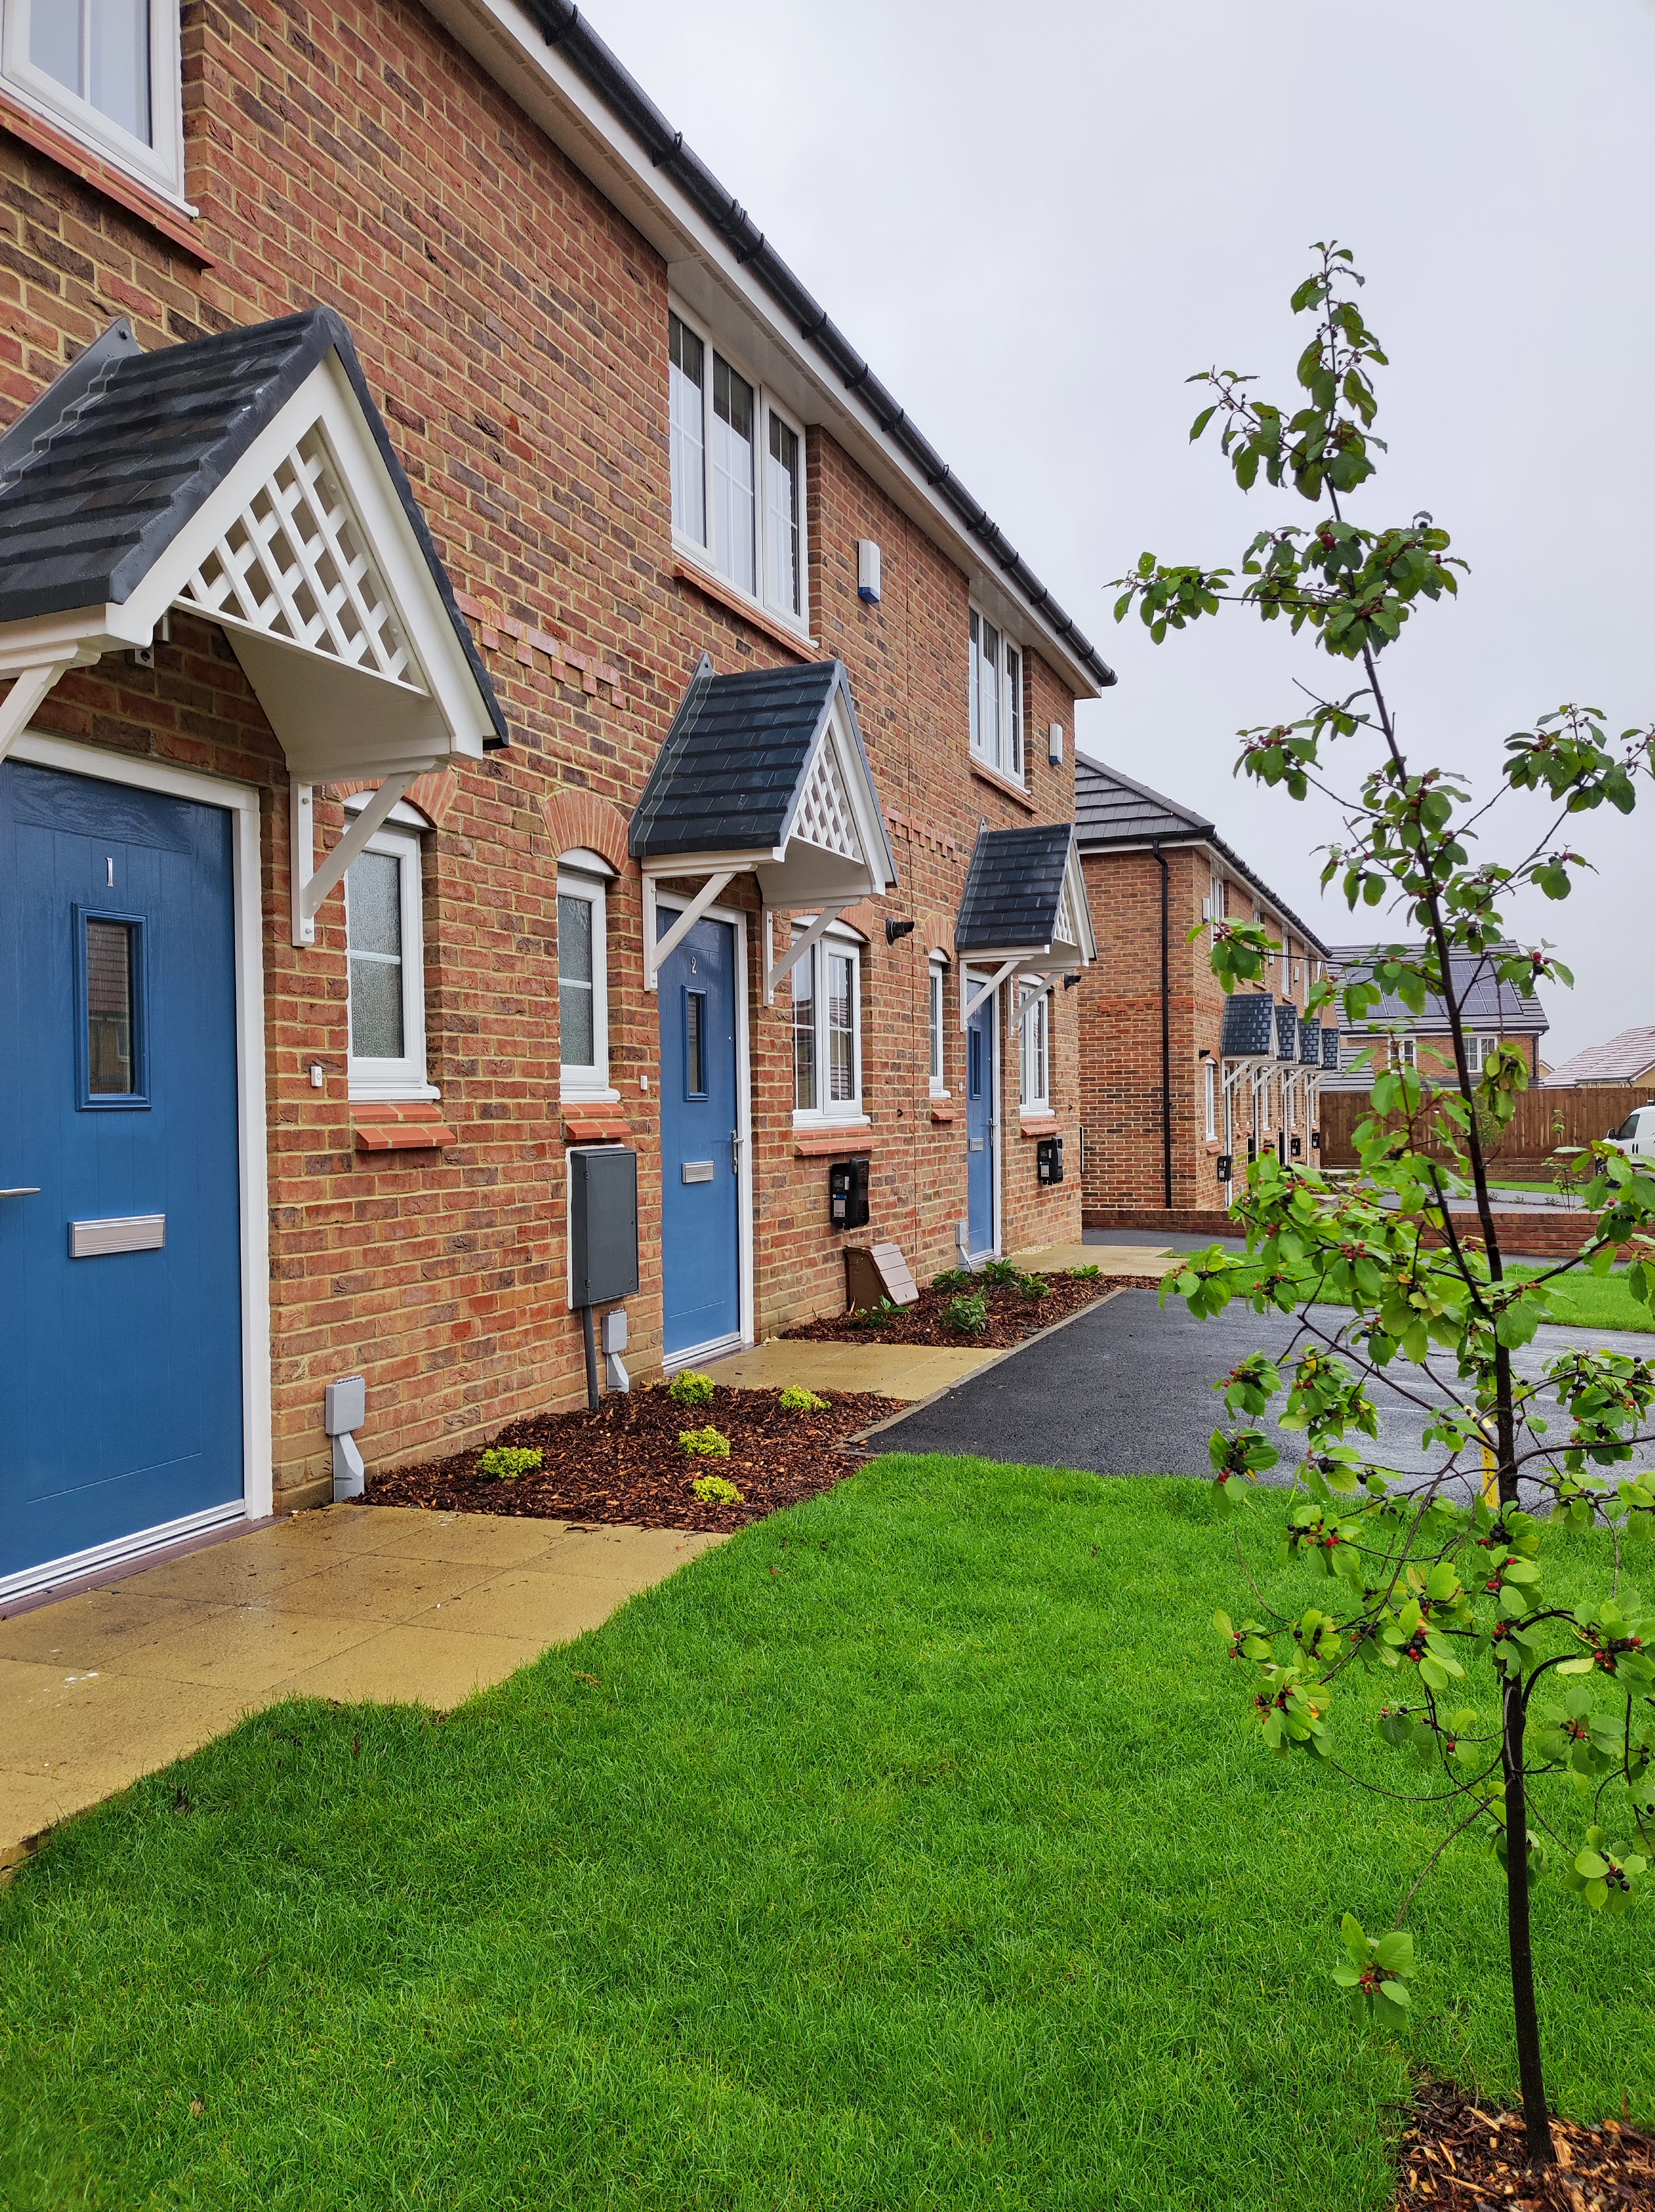 Row of terraced new-builds with blue front doors and grass front garden 